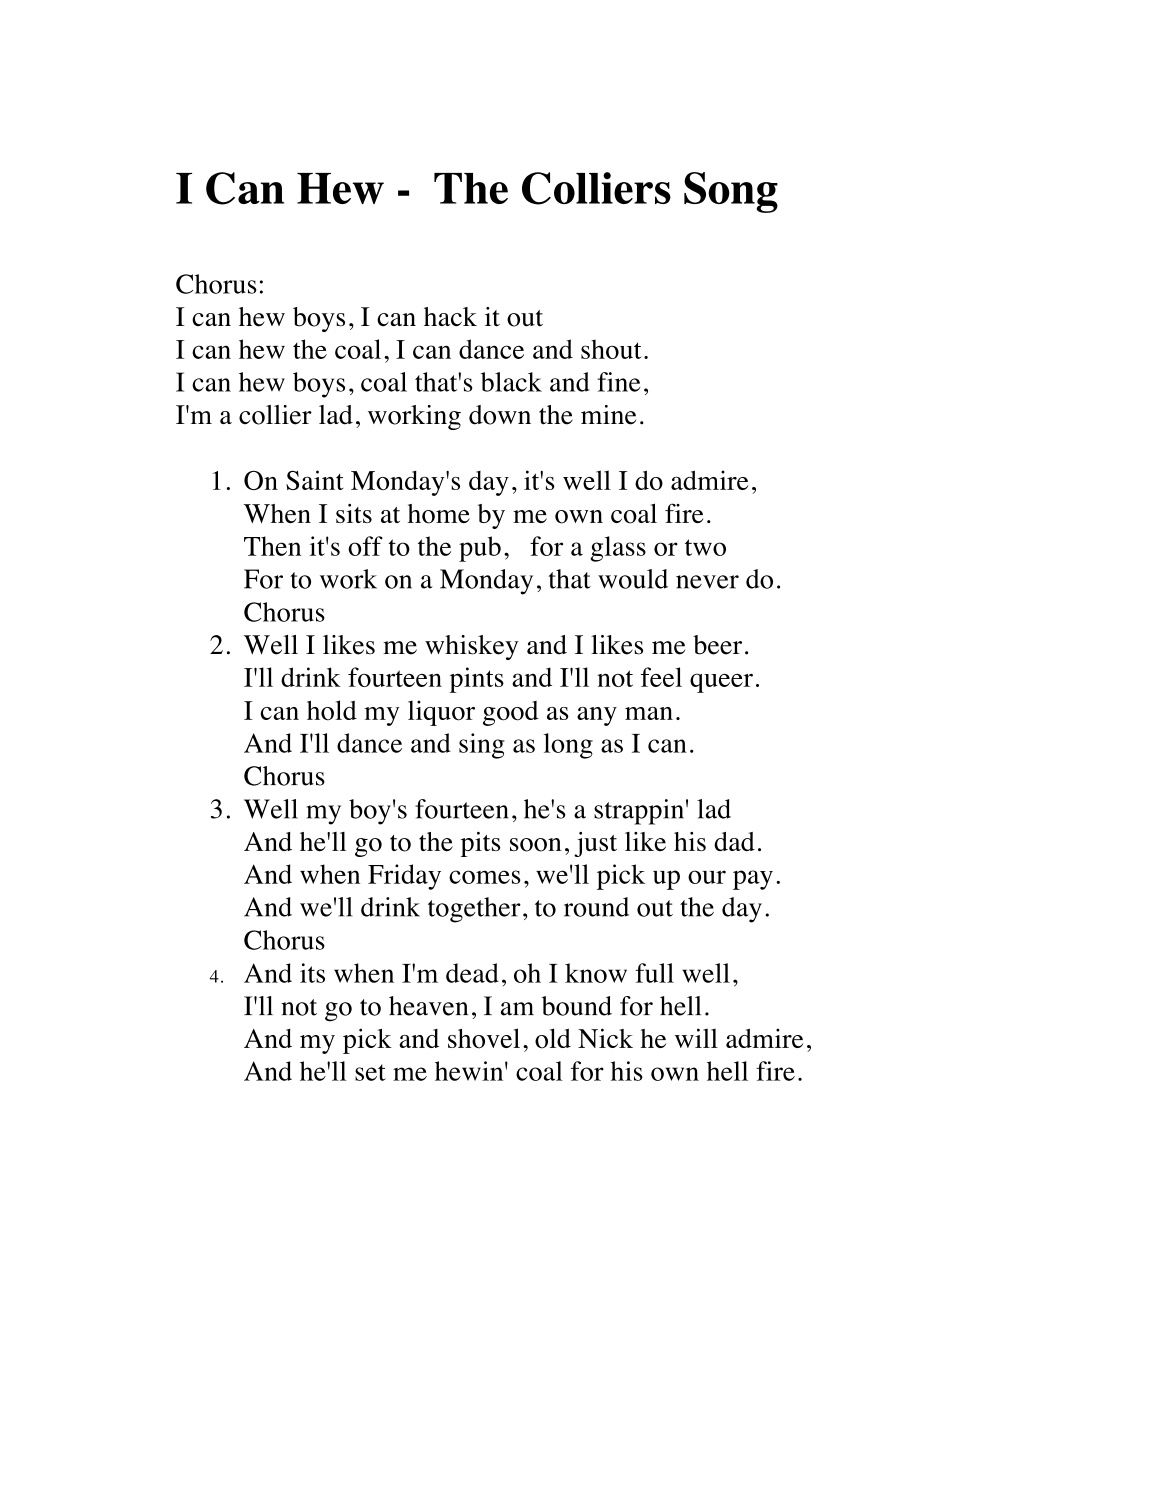 I Can Hew; the Colliers' Song page 1